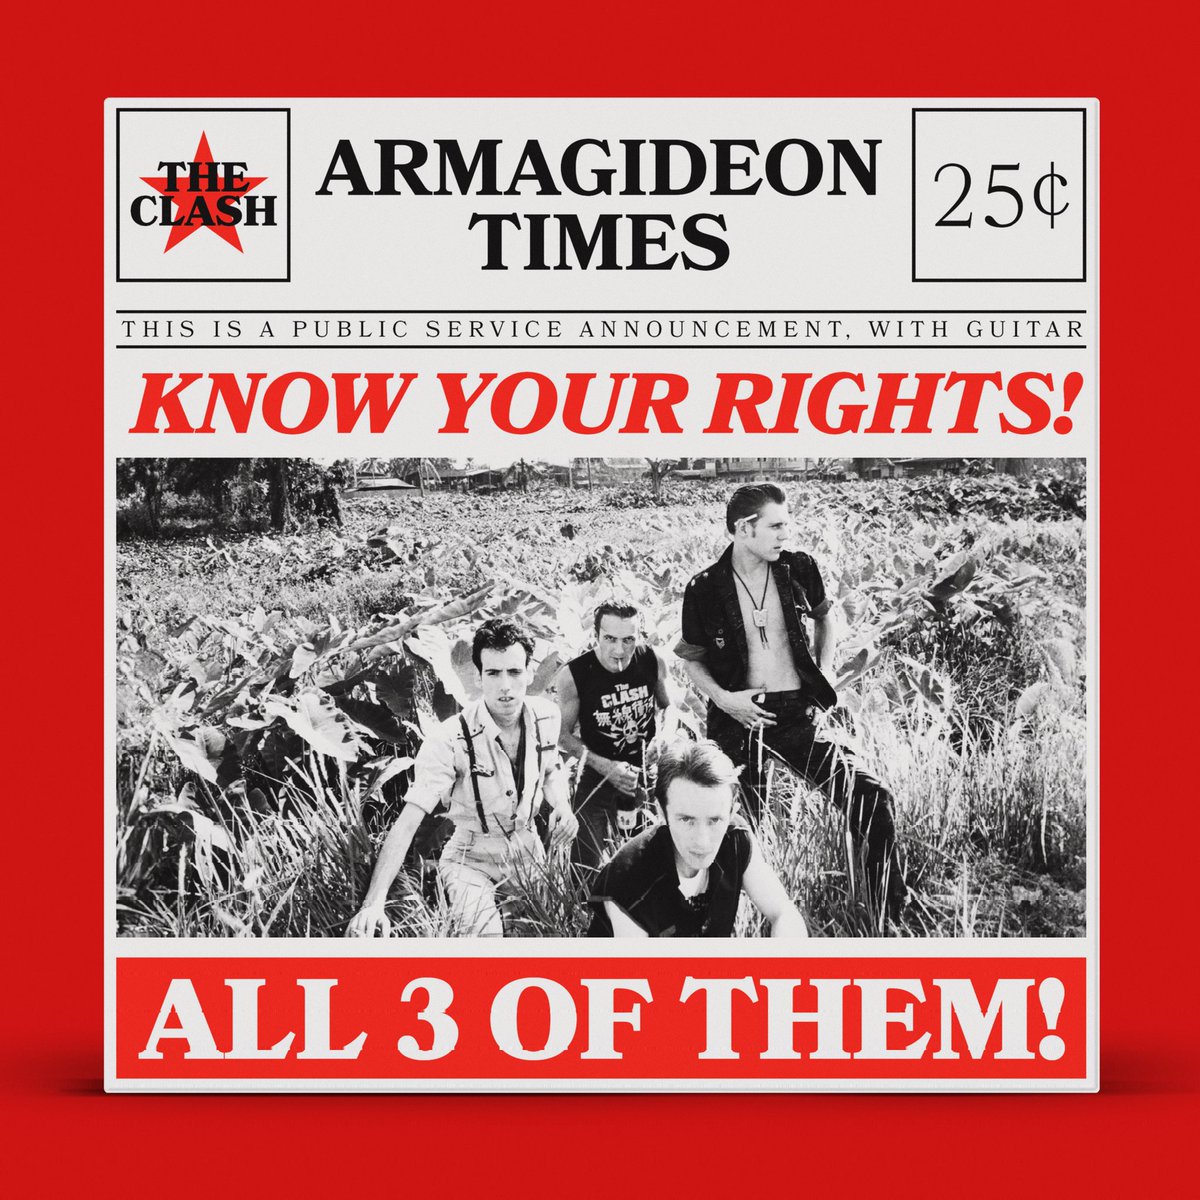 KNOW YOUR RIGHTS 🎸⭐ Thought I'd have a go at designing a cover for the @TheClash single, in the style of the front page of a newspaper #theclash #music #digitalart #design #art #album #vinyl #clash #punk #graphicdesign